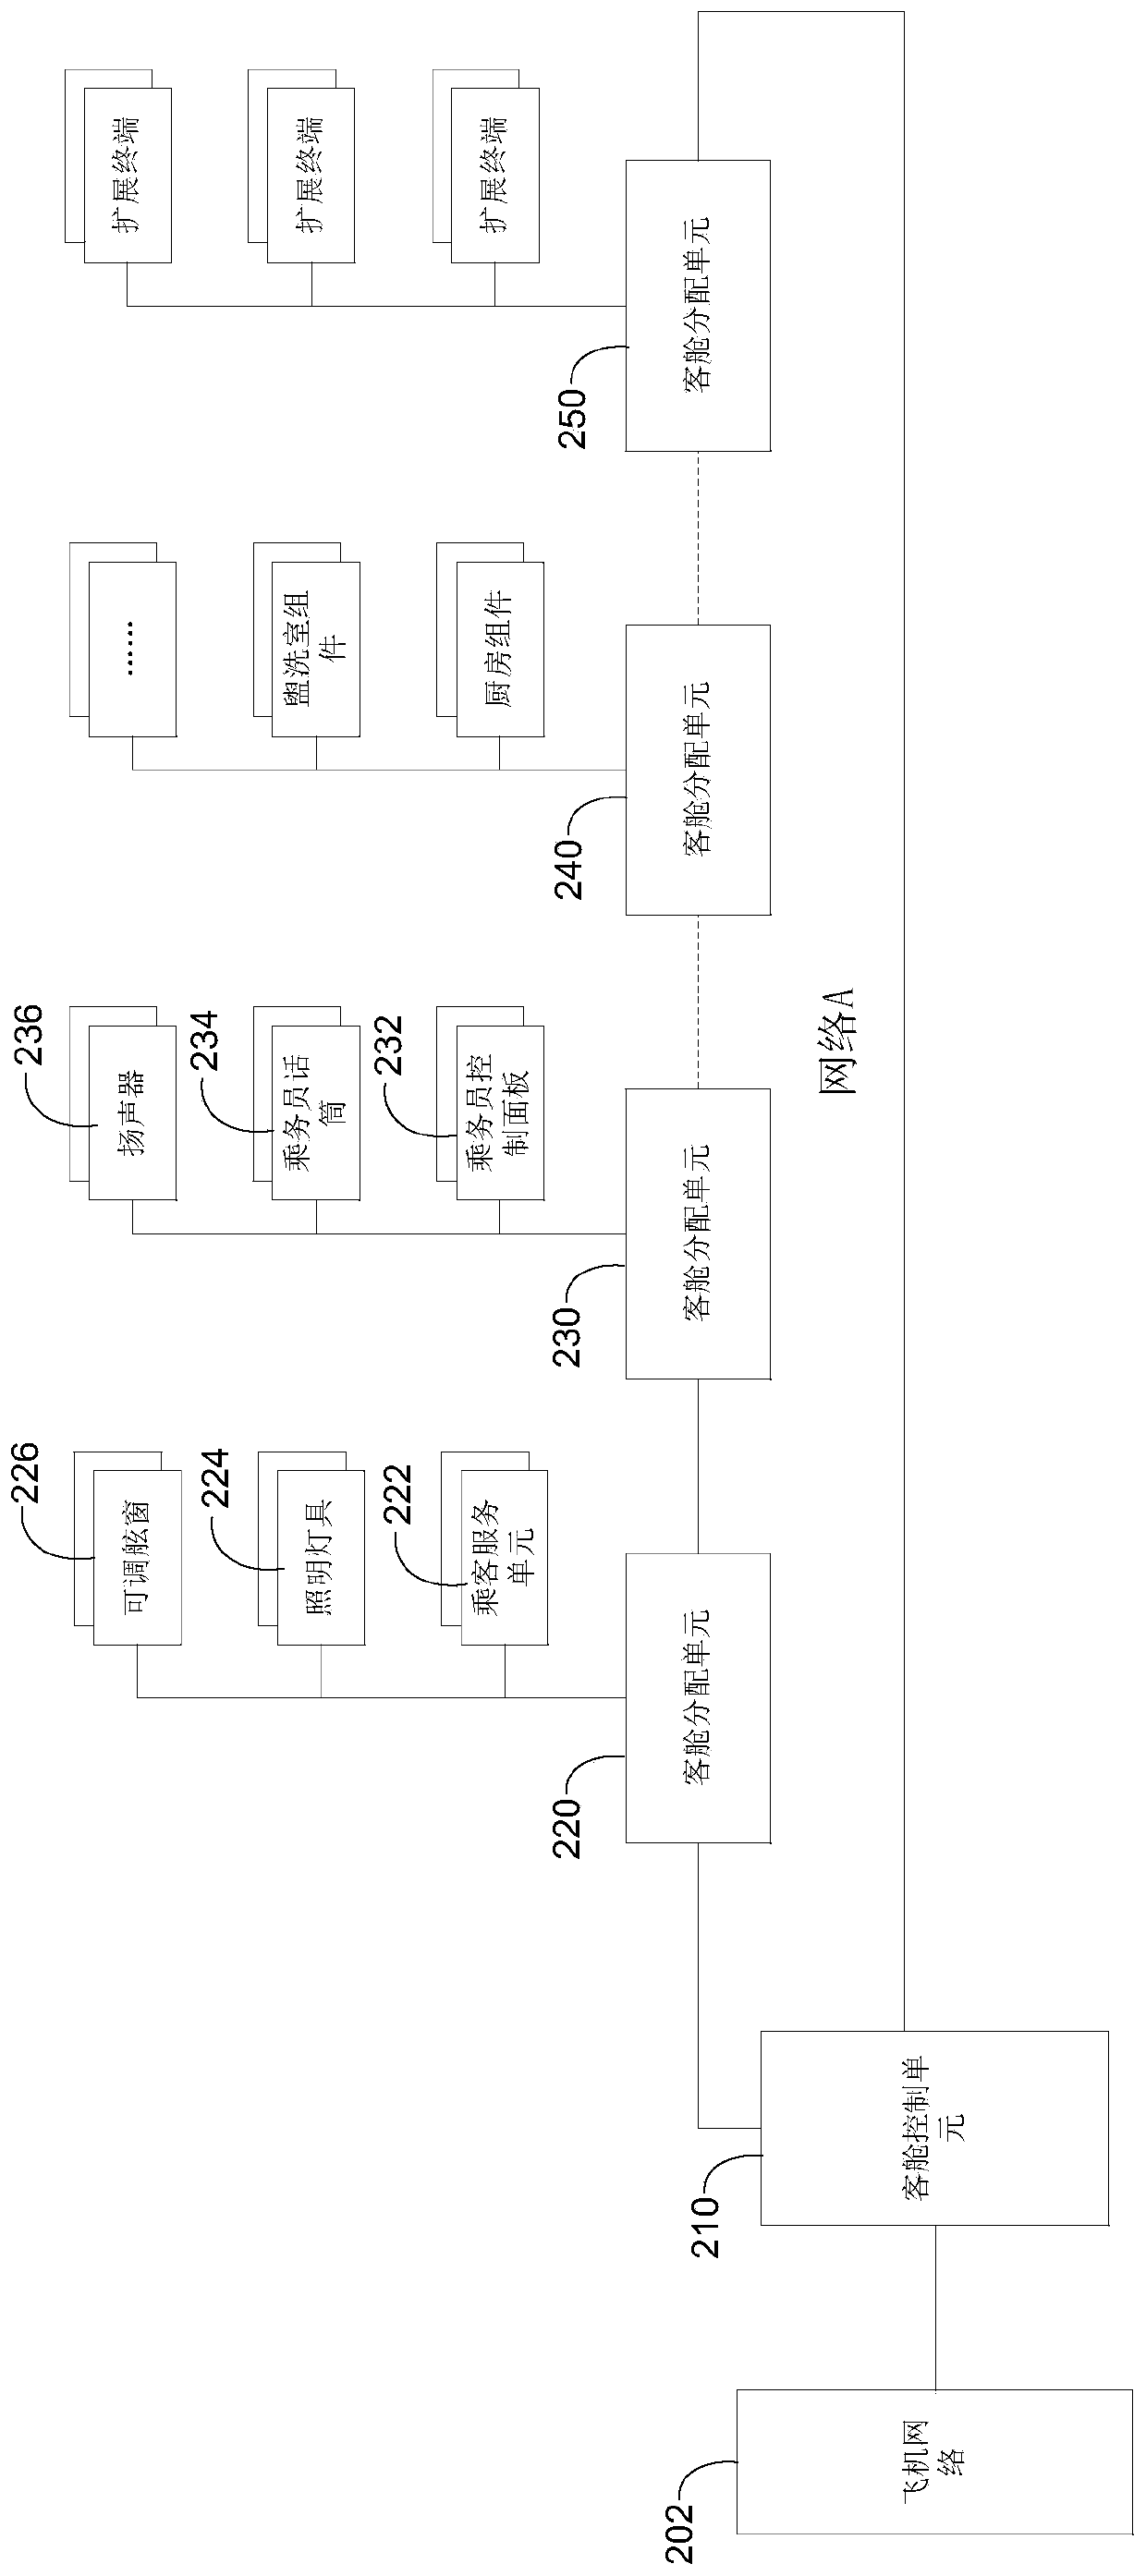 Aircraft cabin data distribution method and system